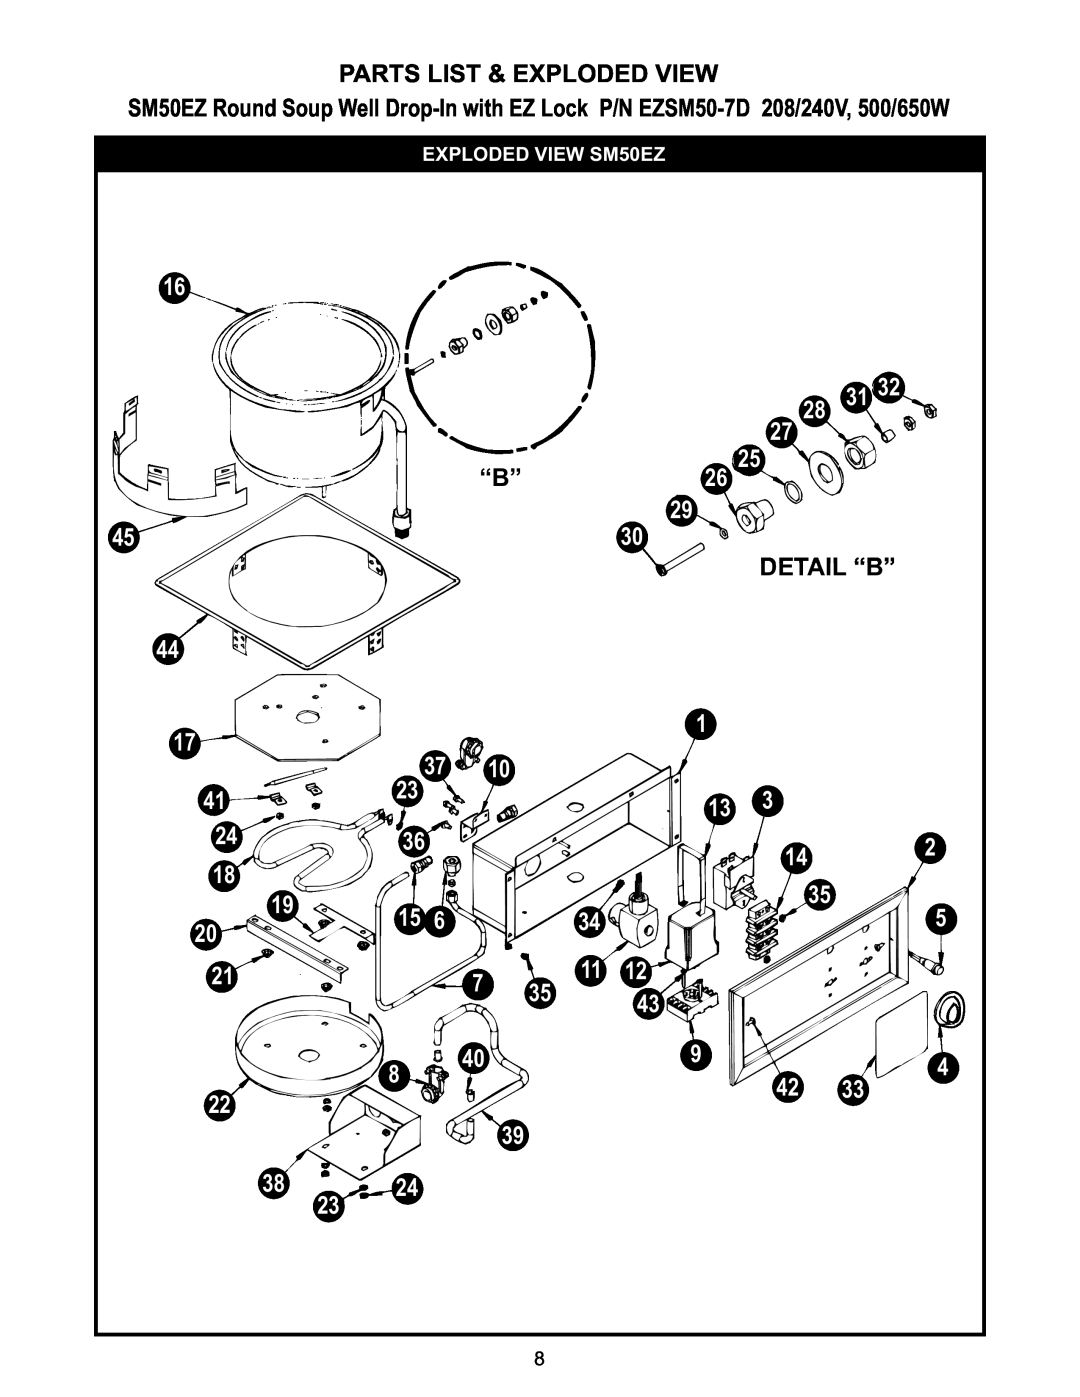 APW Wyott SHFWEZ-6D, SHFWEZ-12D, SHFWEZ-2D, SHFWEZ-3D Parts List & Exploded View, “B”26, Detail “B”, EXPLODED VIEW SM50EZ 